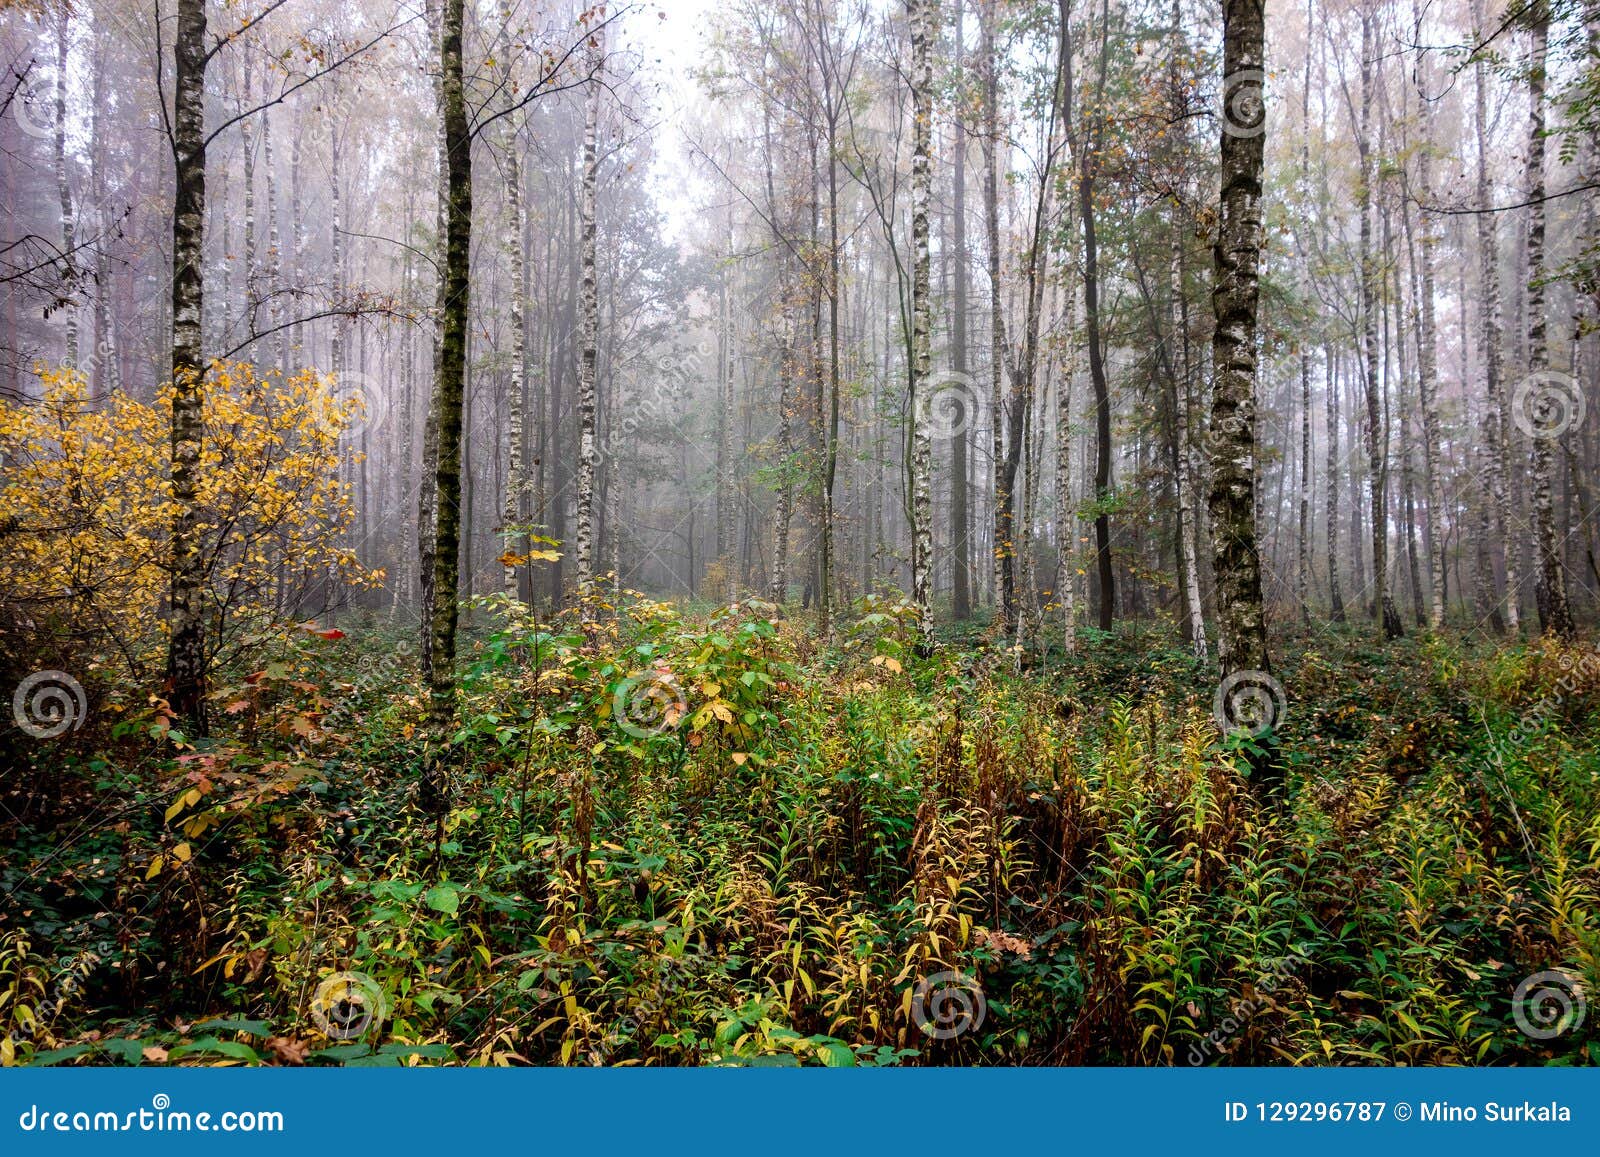 impermeable birch forest with a lot of plants and fog